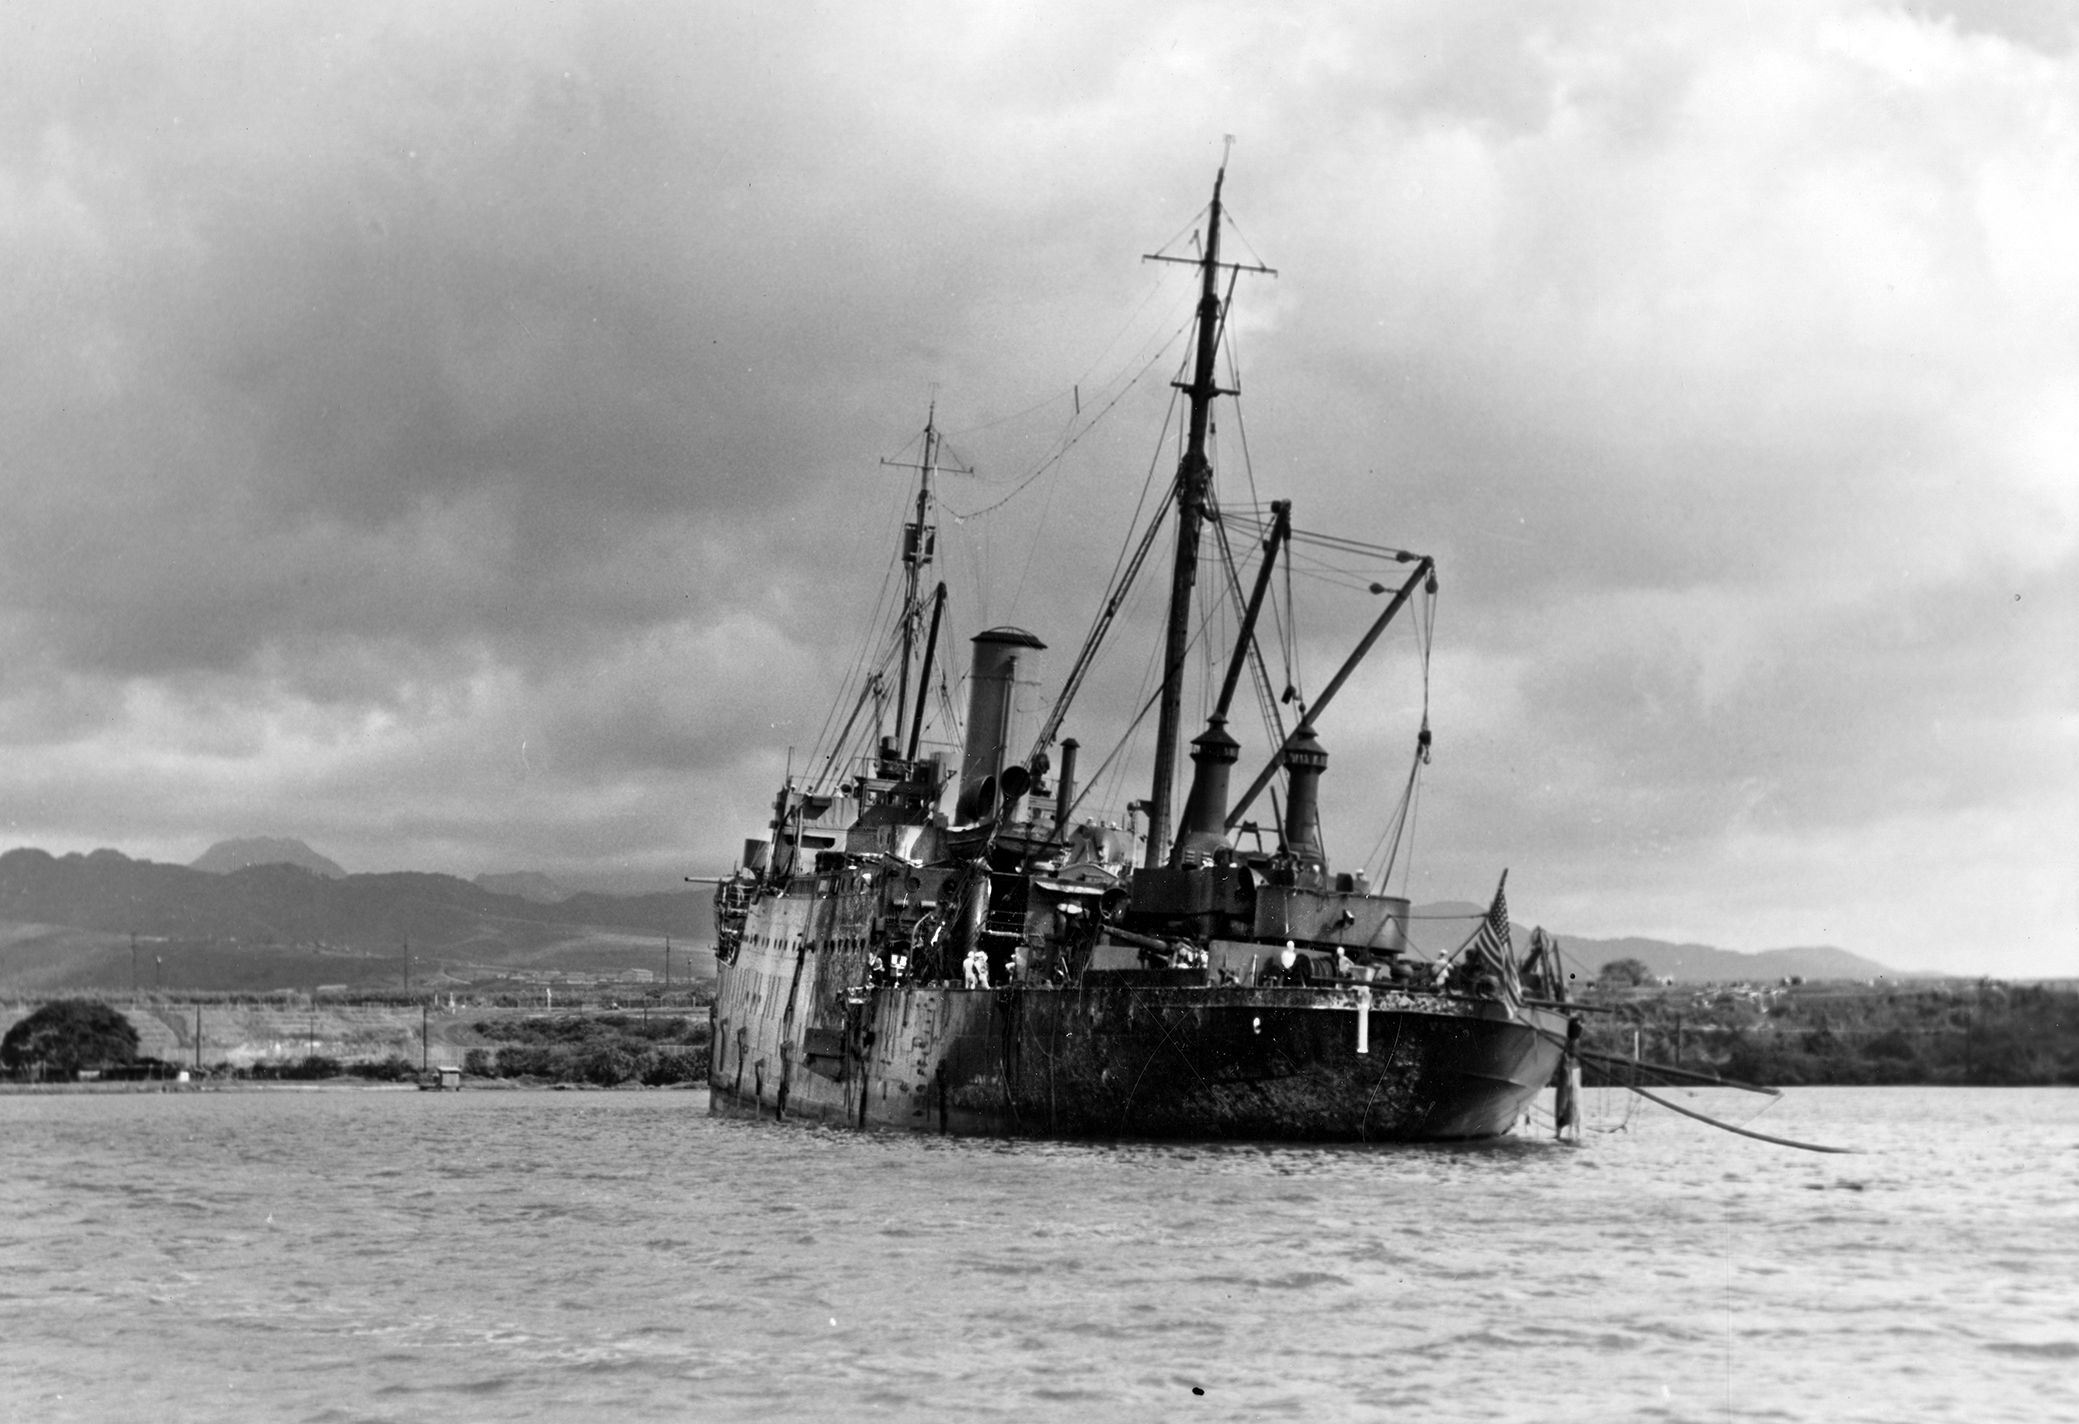 Commander Young ordered the USS Vestal to get underway as flames engulfed Arizona, then grounded his ship to save it. Vestal’s crew aided sailors trapped in the capsized battleship USS Oklahoma.